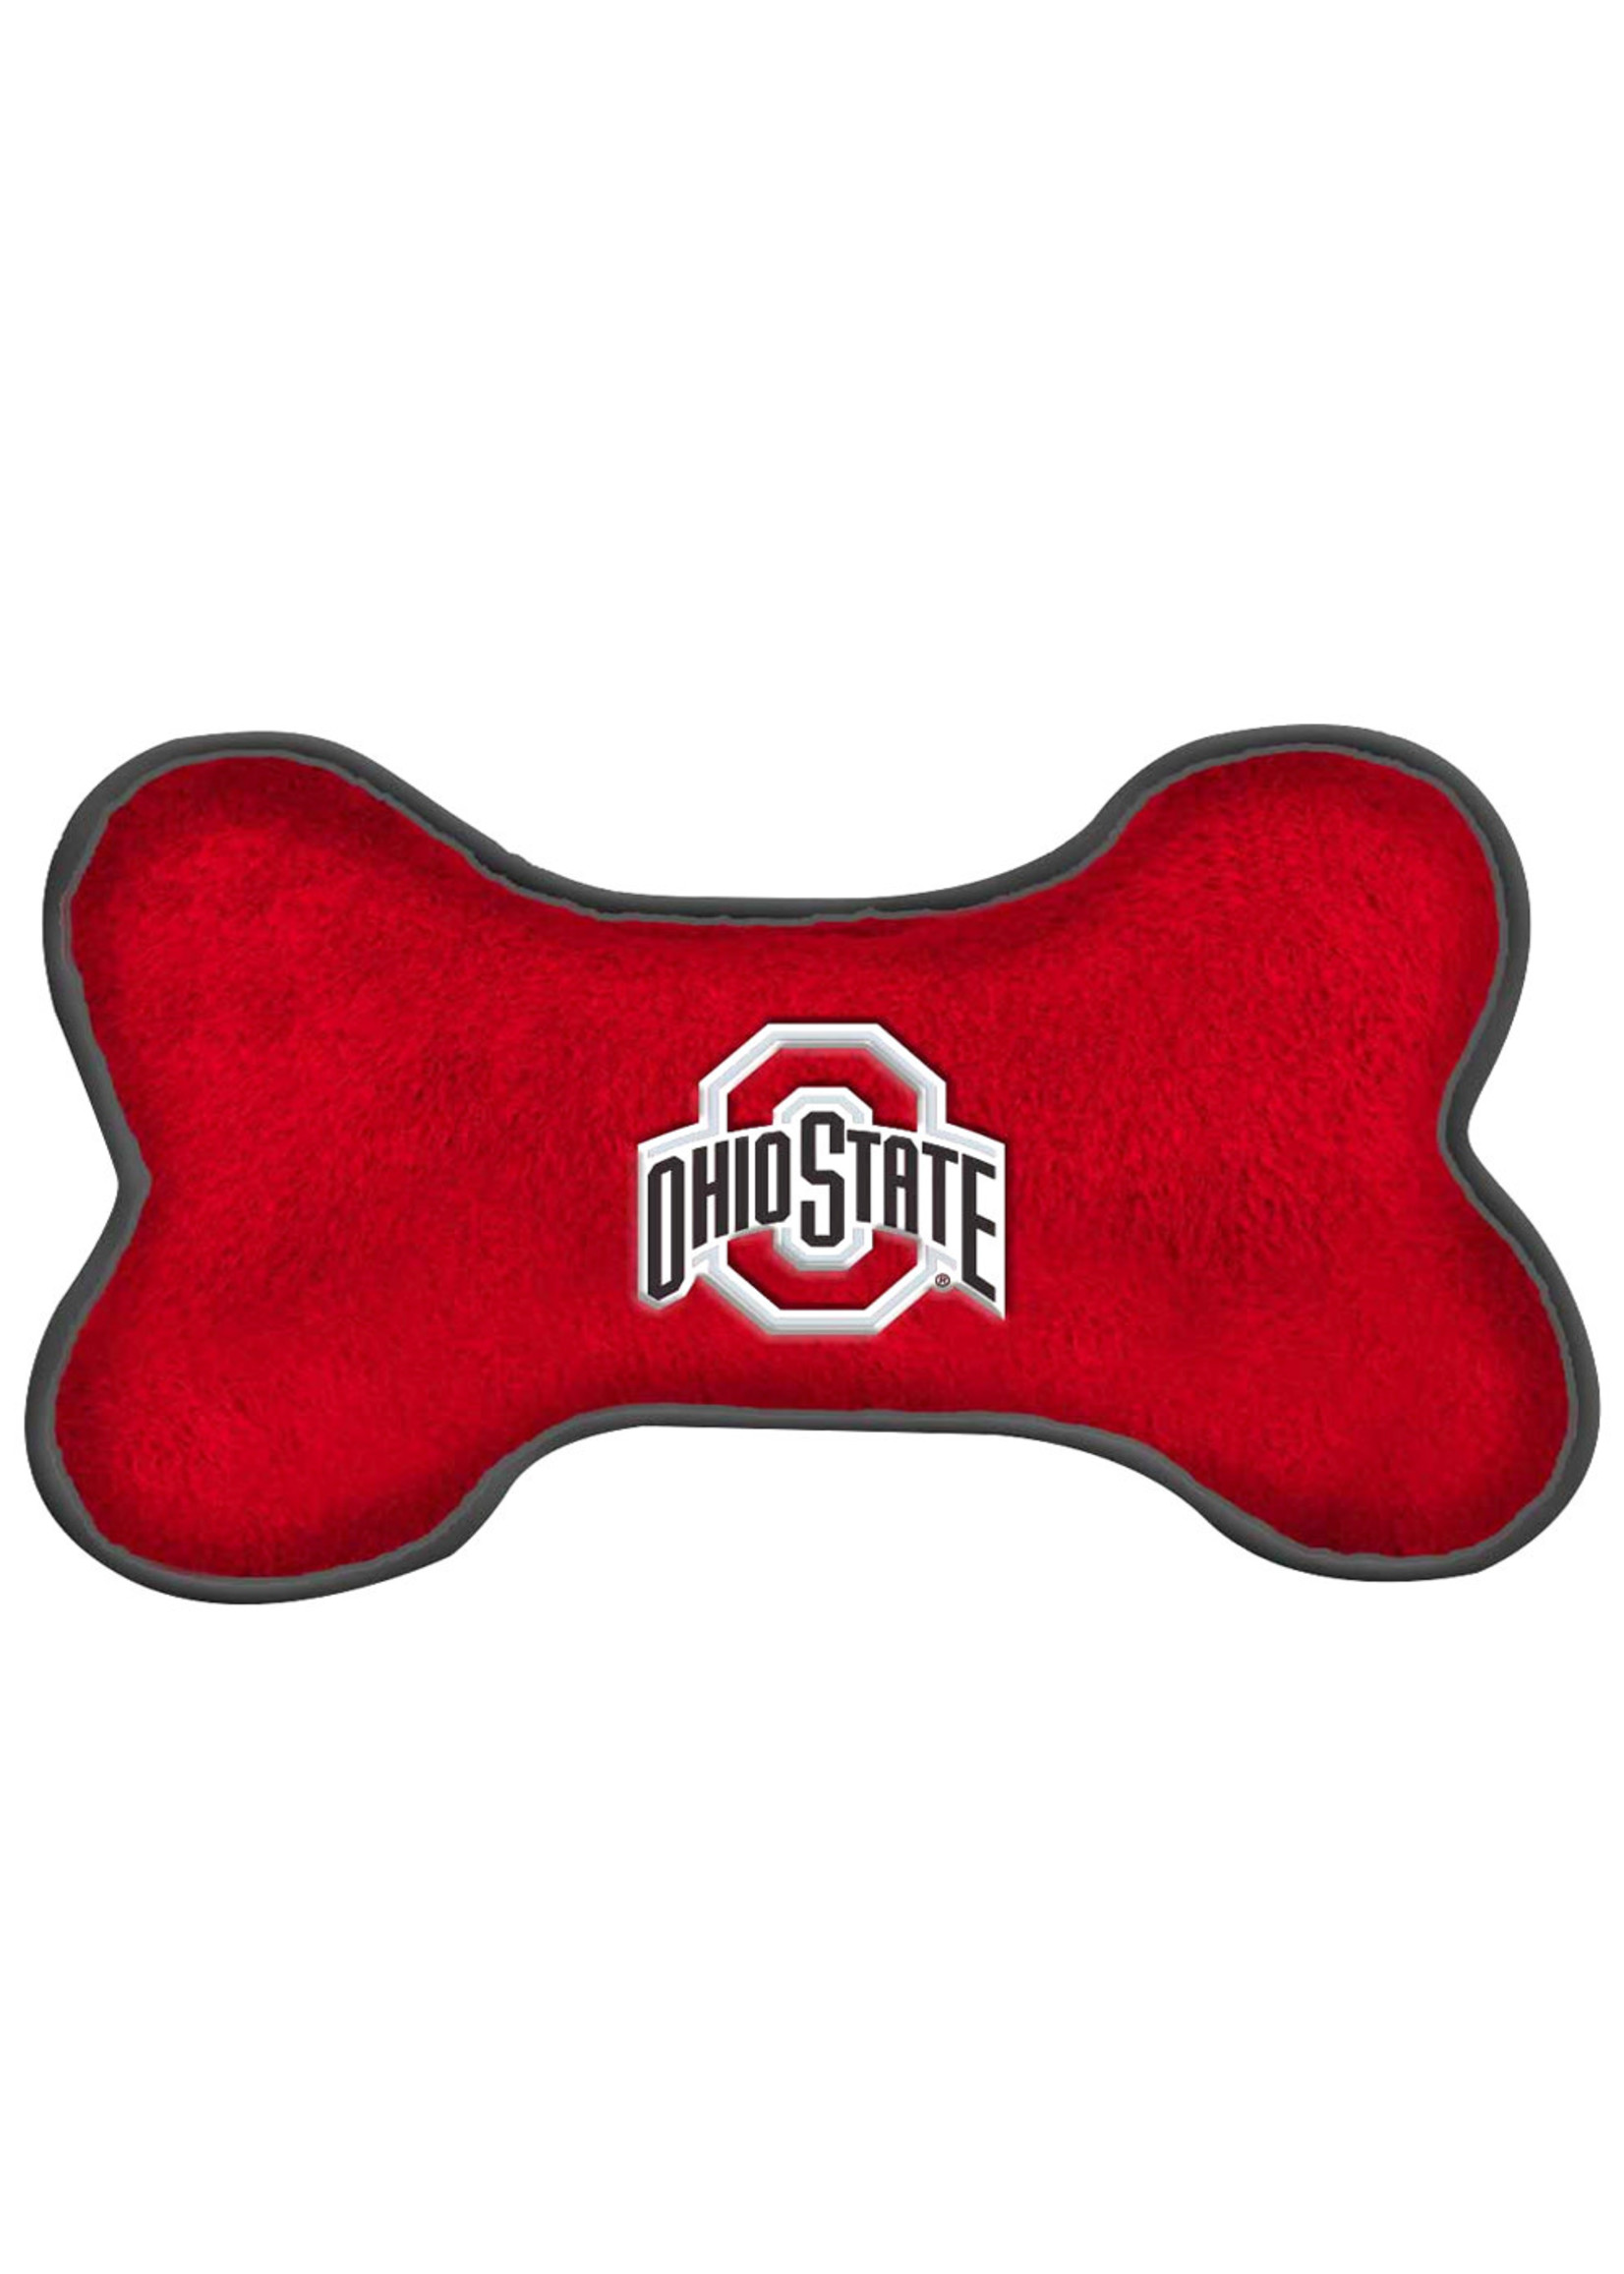 ALL STAR DOGS Ohio State Buckeyes Bone Chew Toy - Large